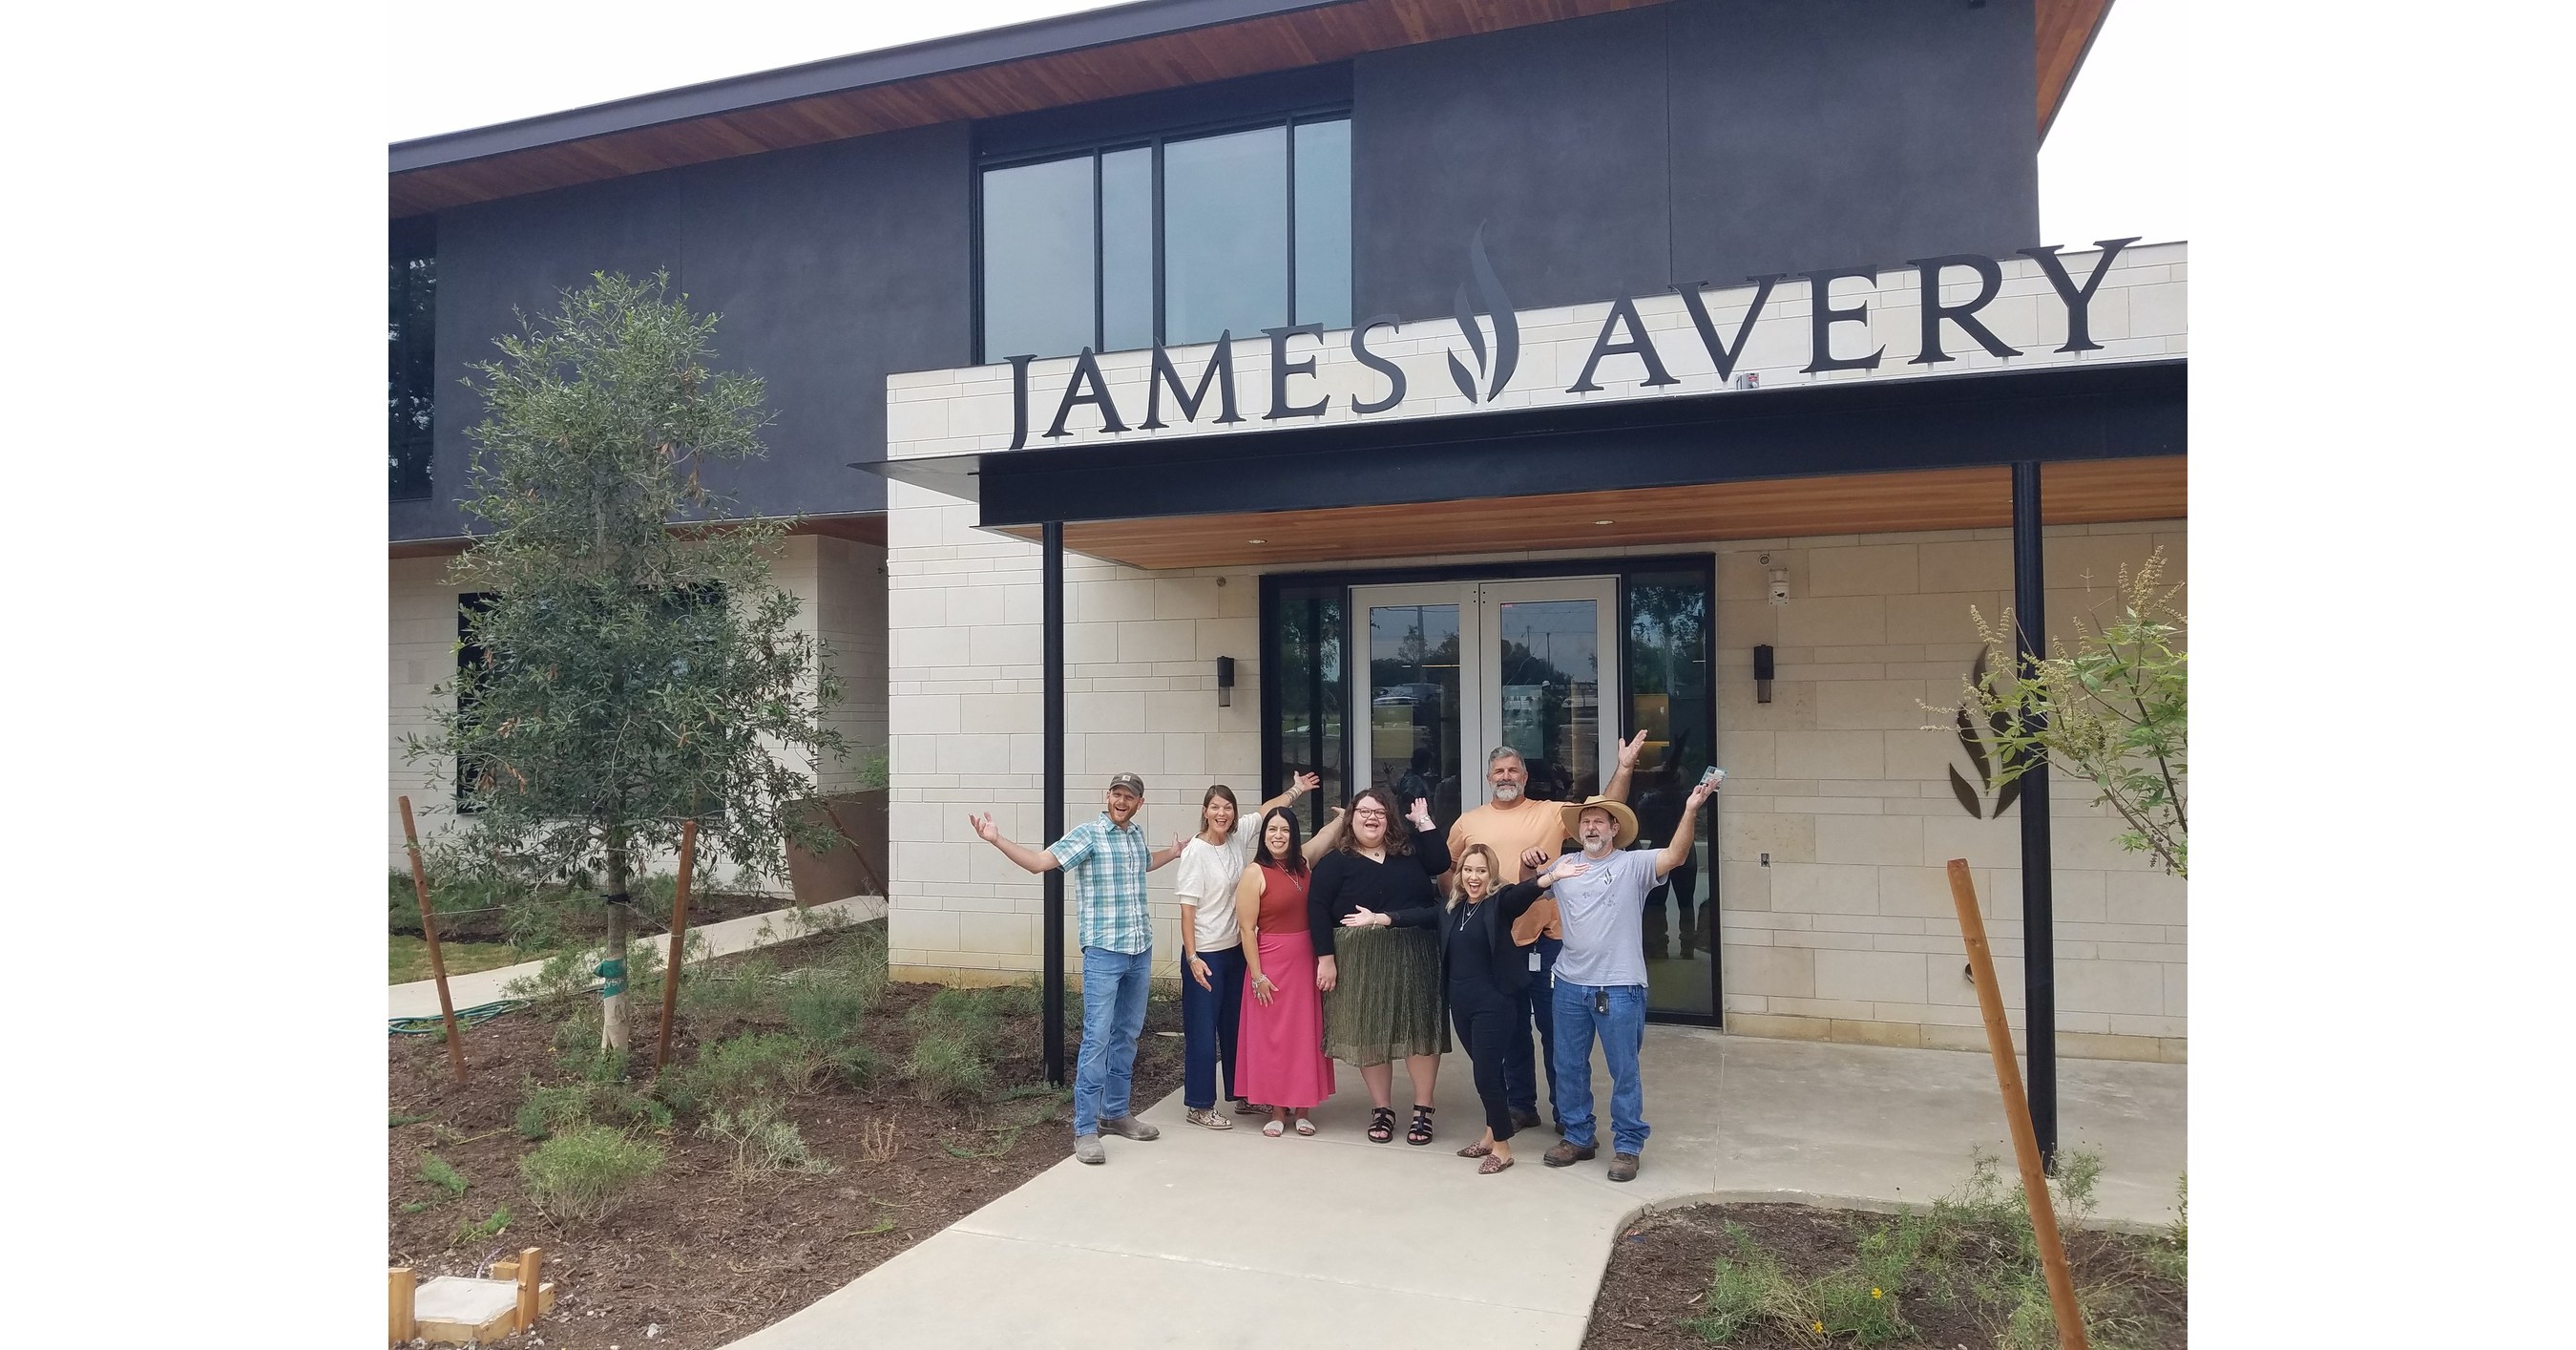 James Avery Jewelry Counter at Park Meadows in Lone Tree